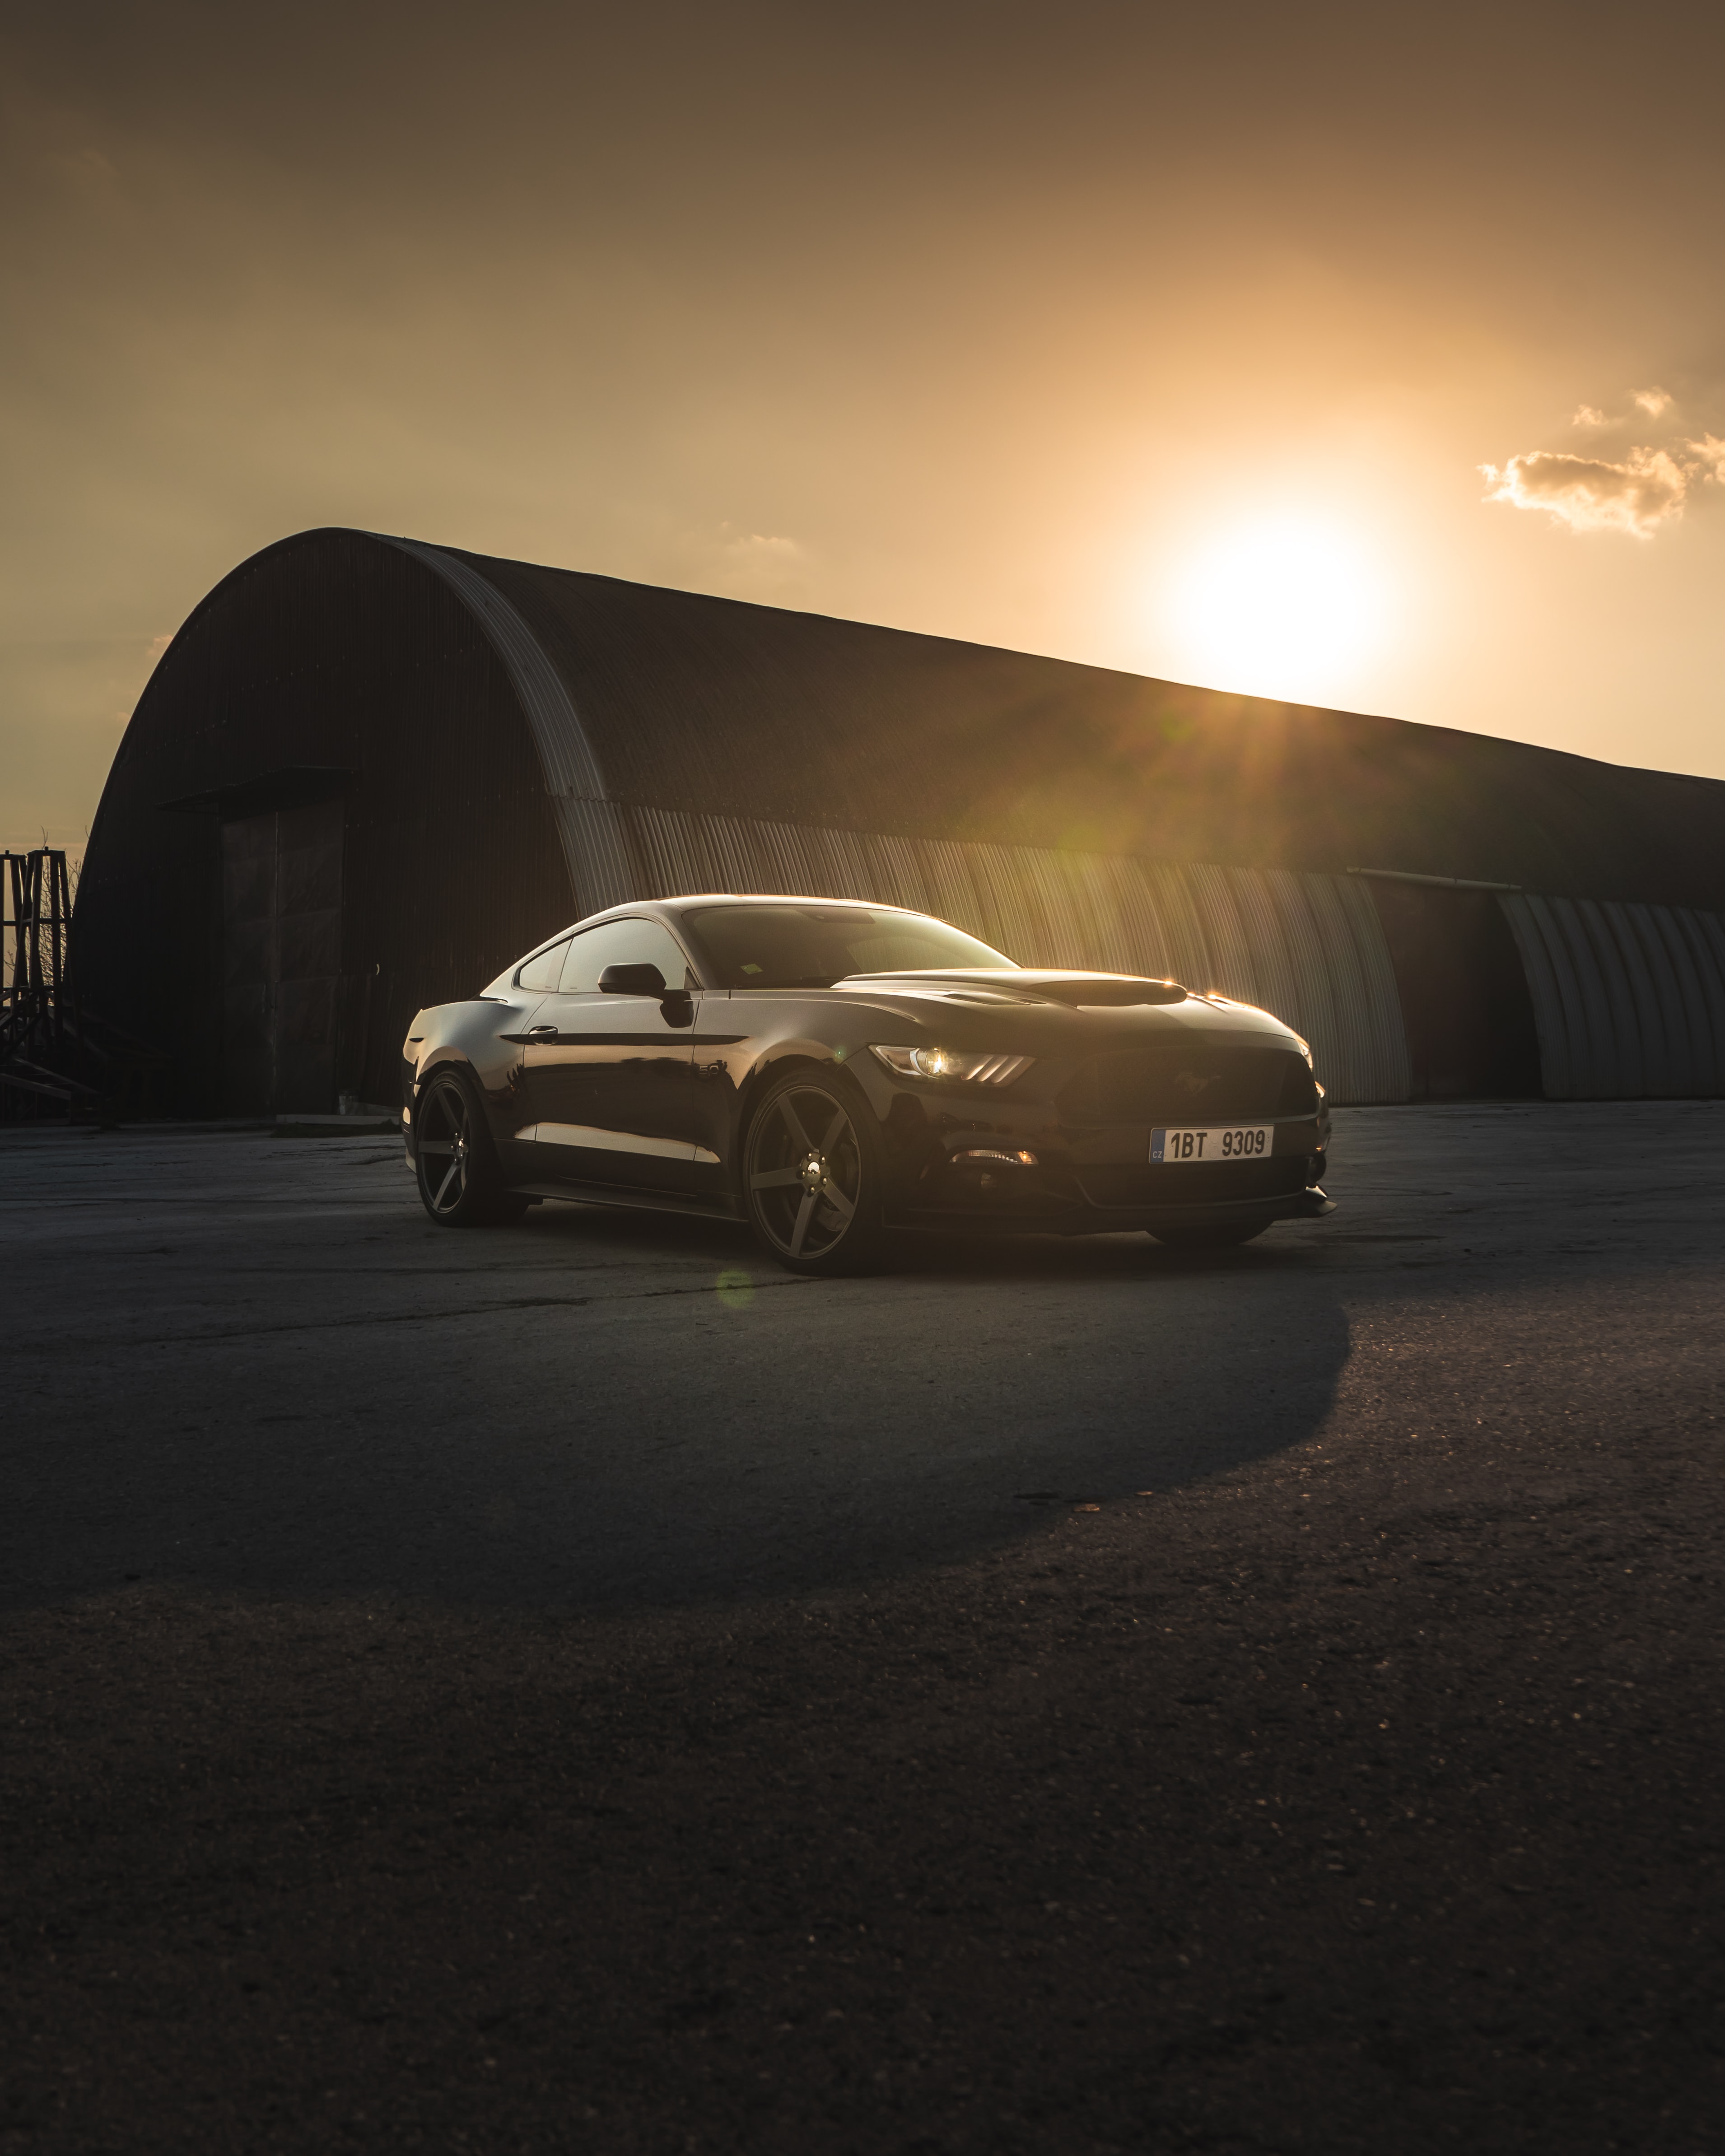 mustang, ford mustang, sports car, cars, black, sports, sunset, car, side view